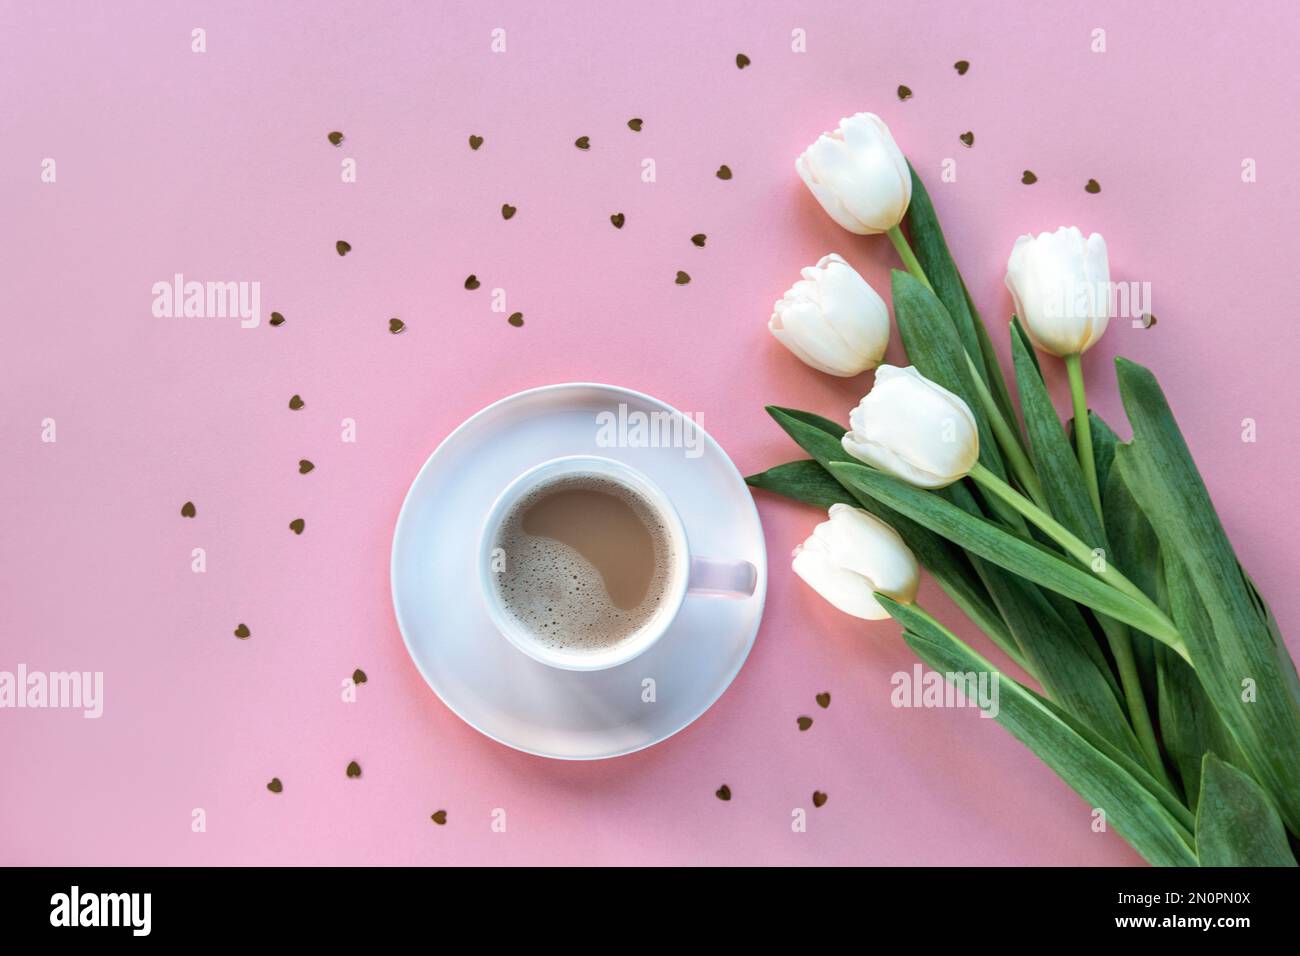 Coffee cup, white tulips and heart shaped confetti on pink background. Valentines day, spring holidays concept. Top view, flat lay. Stock Photo